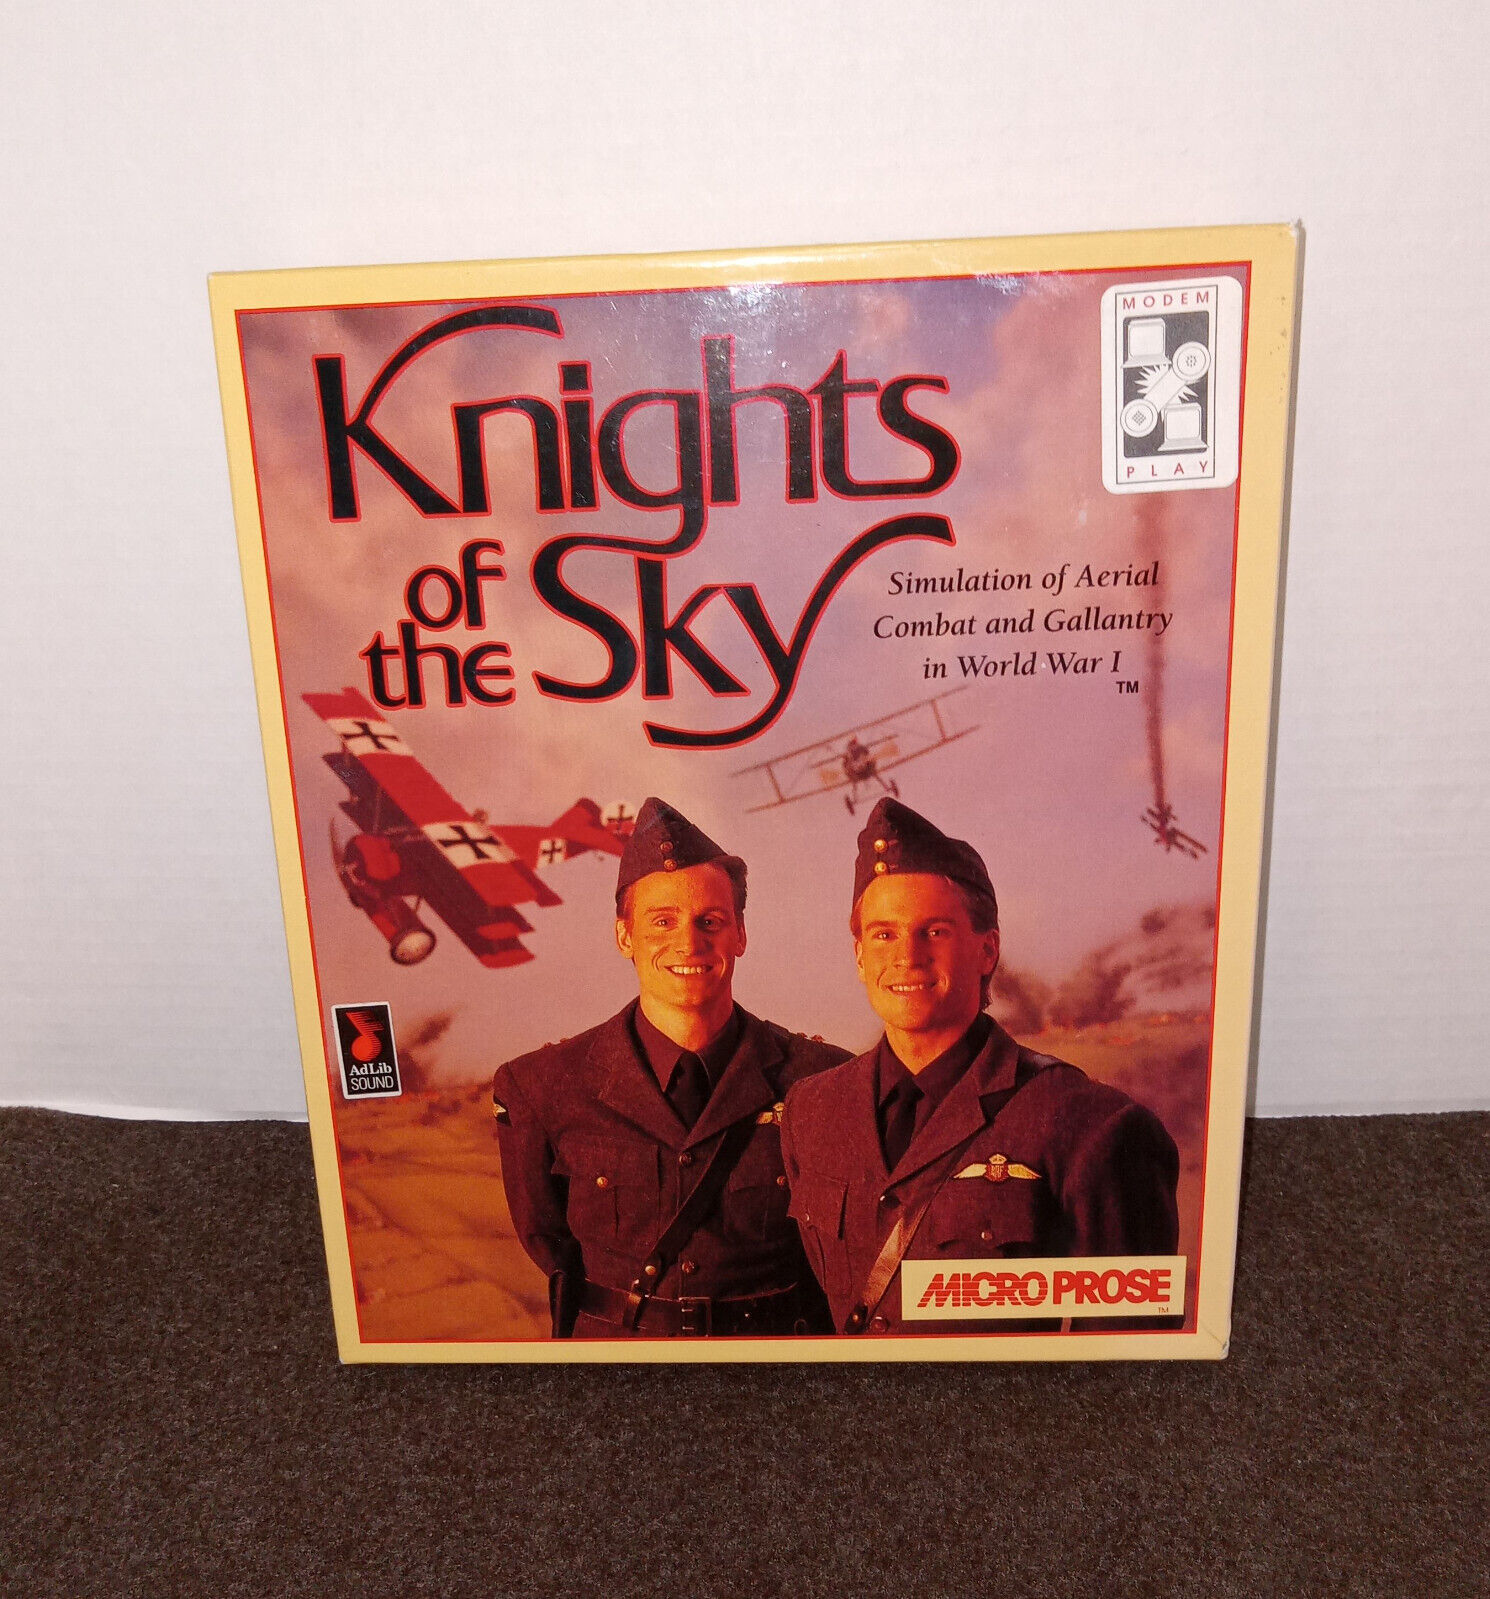 Primary image for Knights of the Sky (IBM TANDY PC) 5.25 Floppy Disk Big Box Game Great Condition